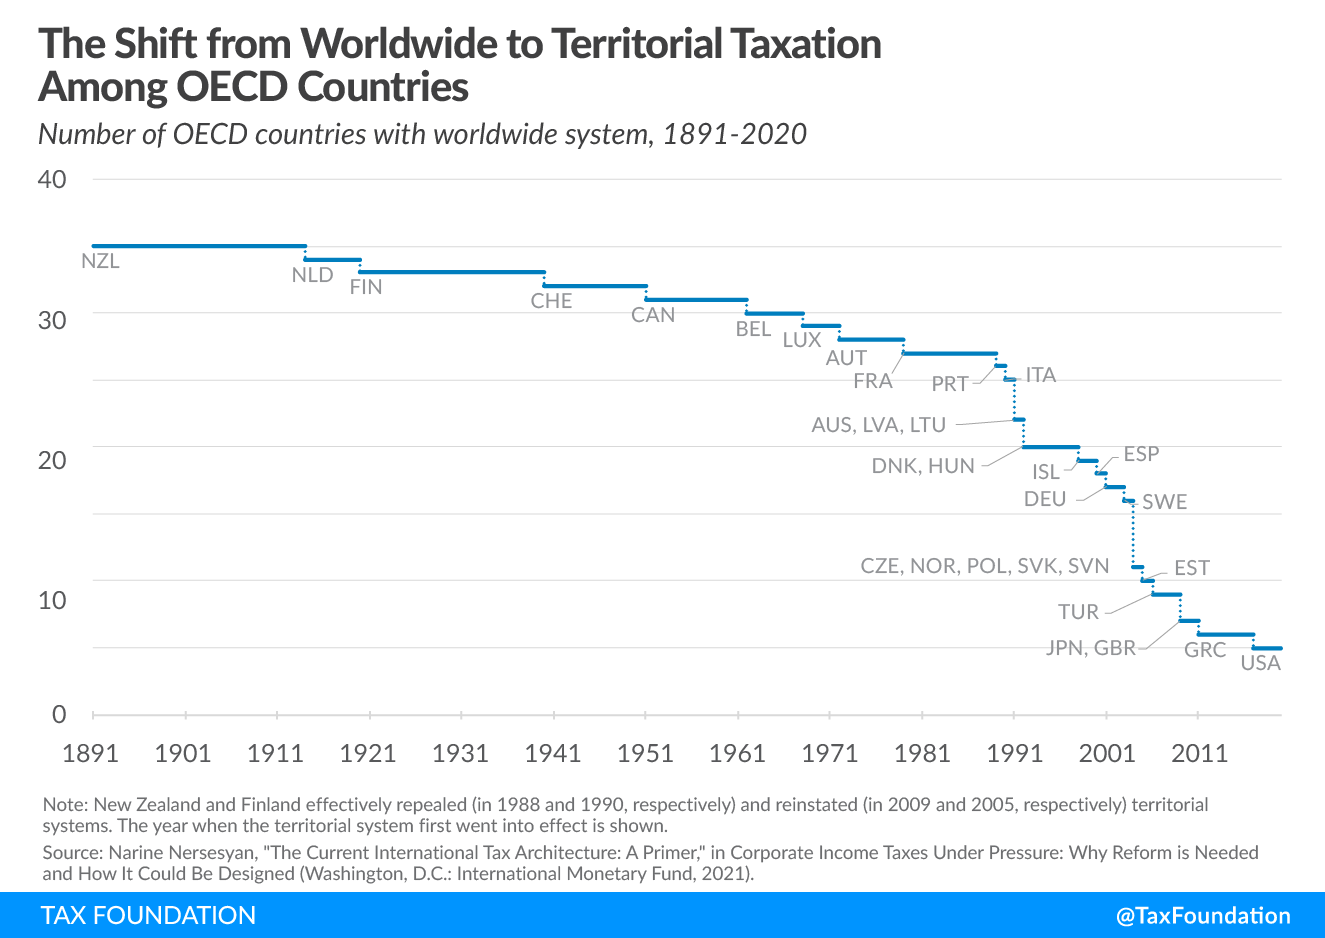 The Shift from Worldwide taxation to territorial taxation among OECD countries,Anti-Base Erosion Provisions and Territorial Tax Systems in OECD Countries